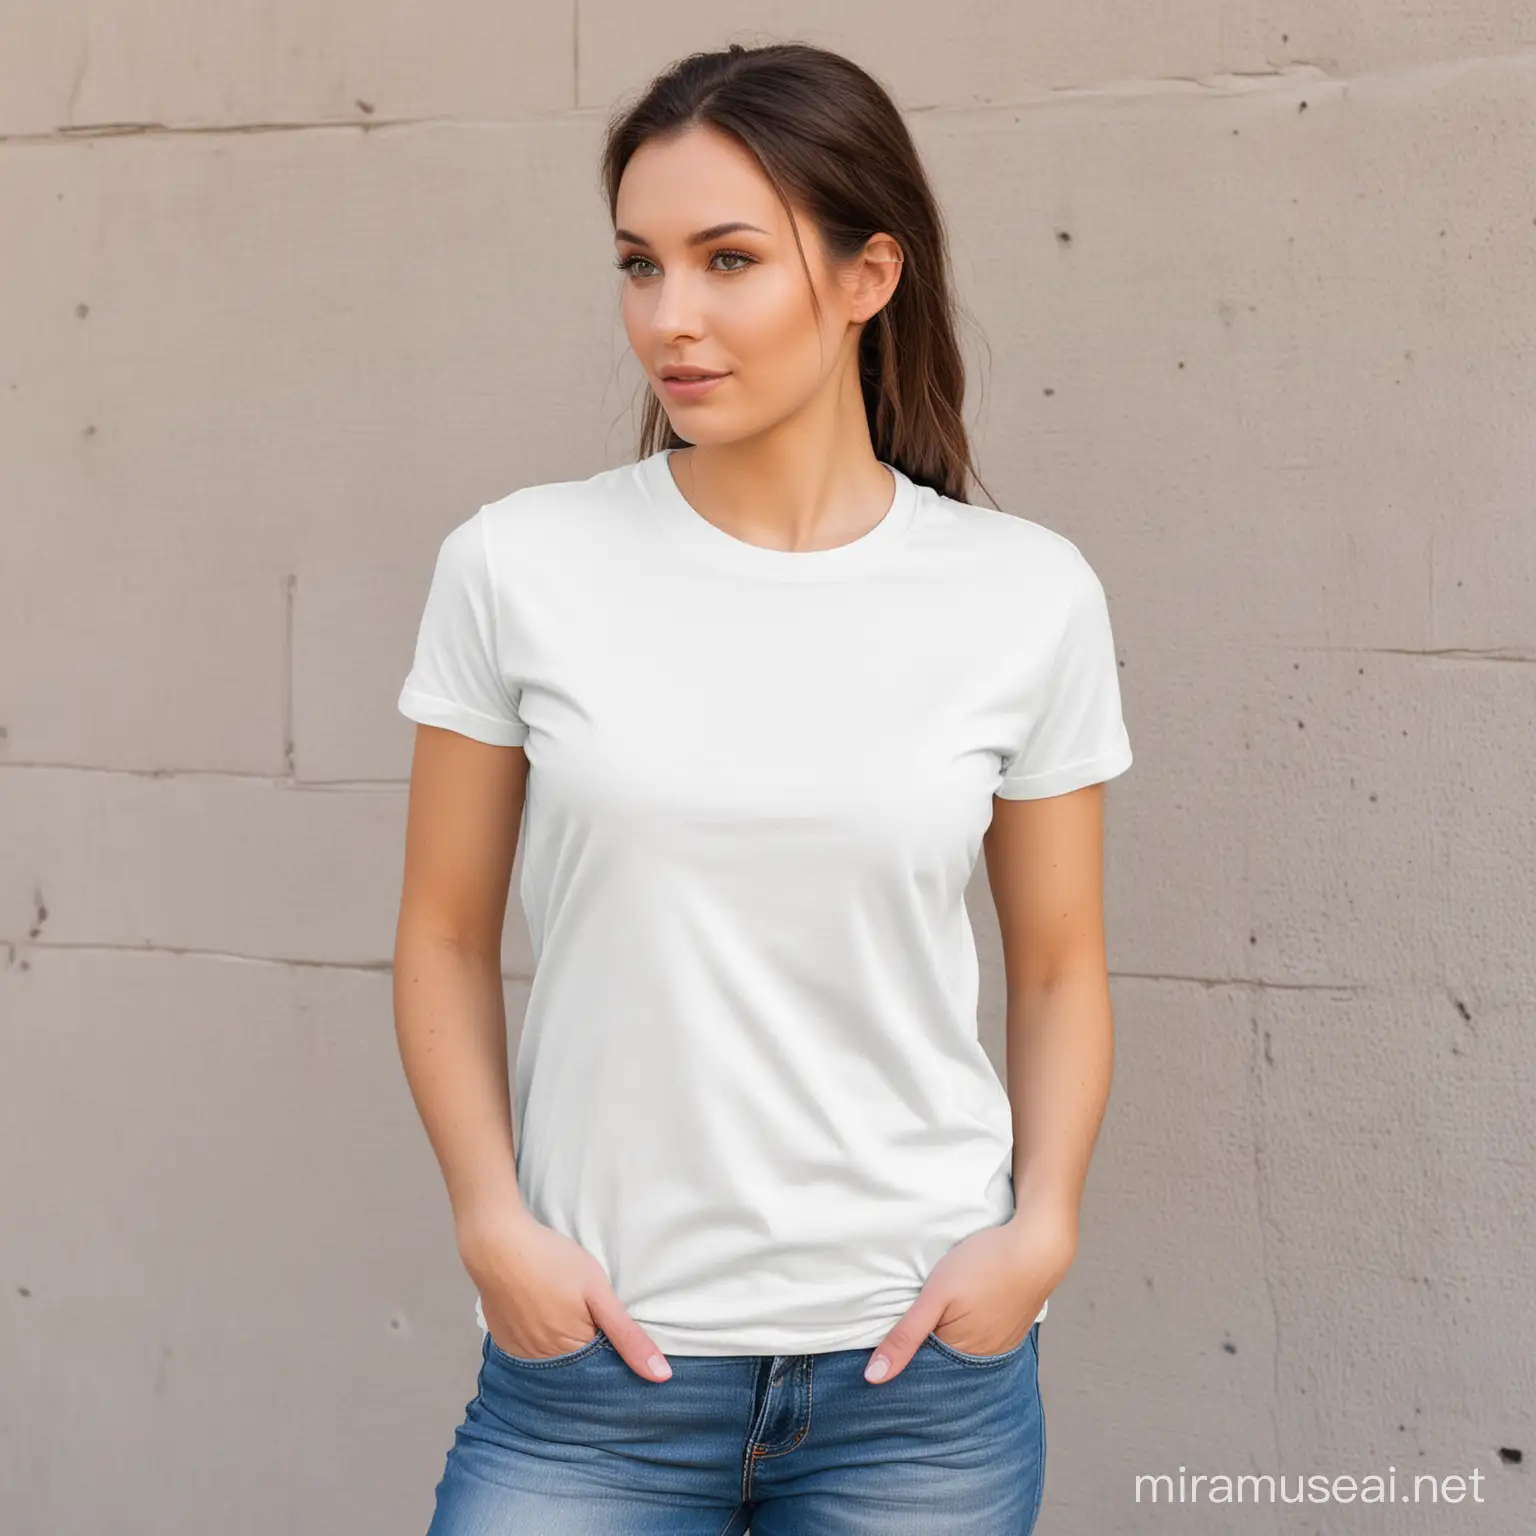 bella+canvas 3001 mockup in white with a blank shirt